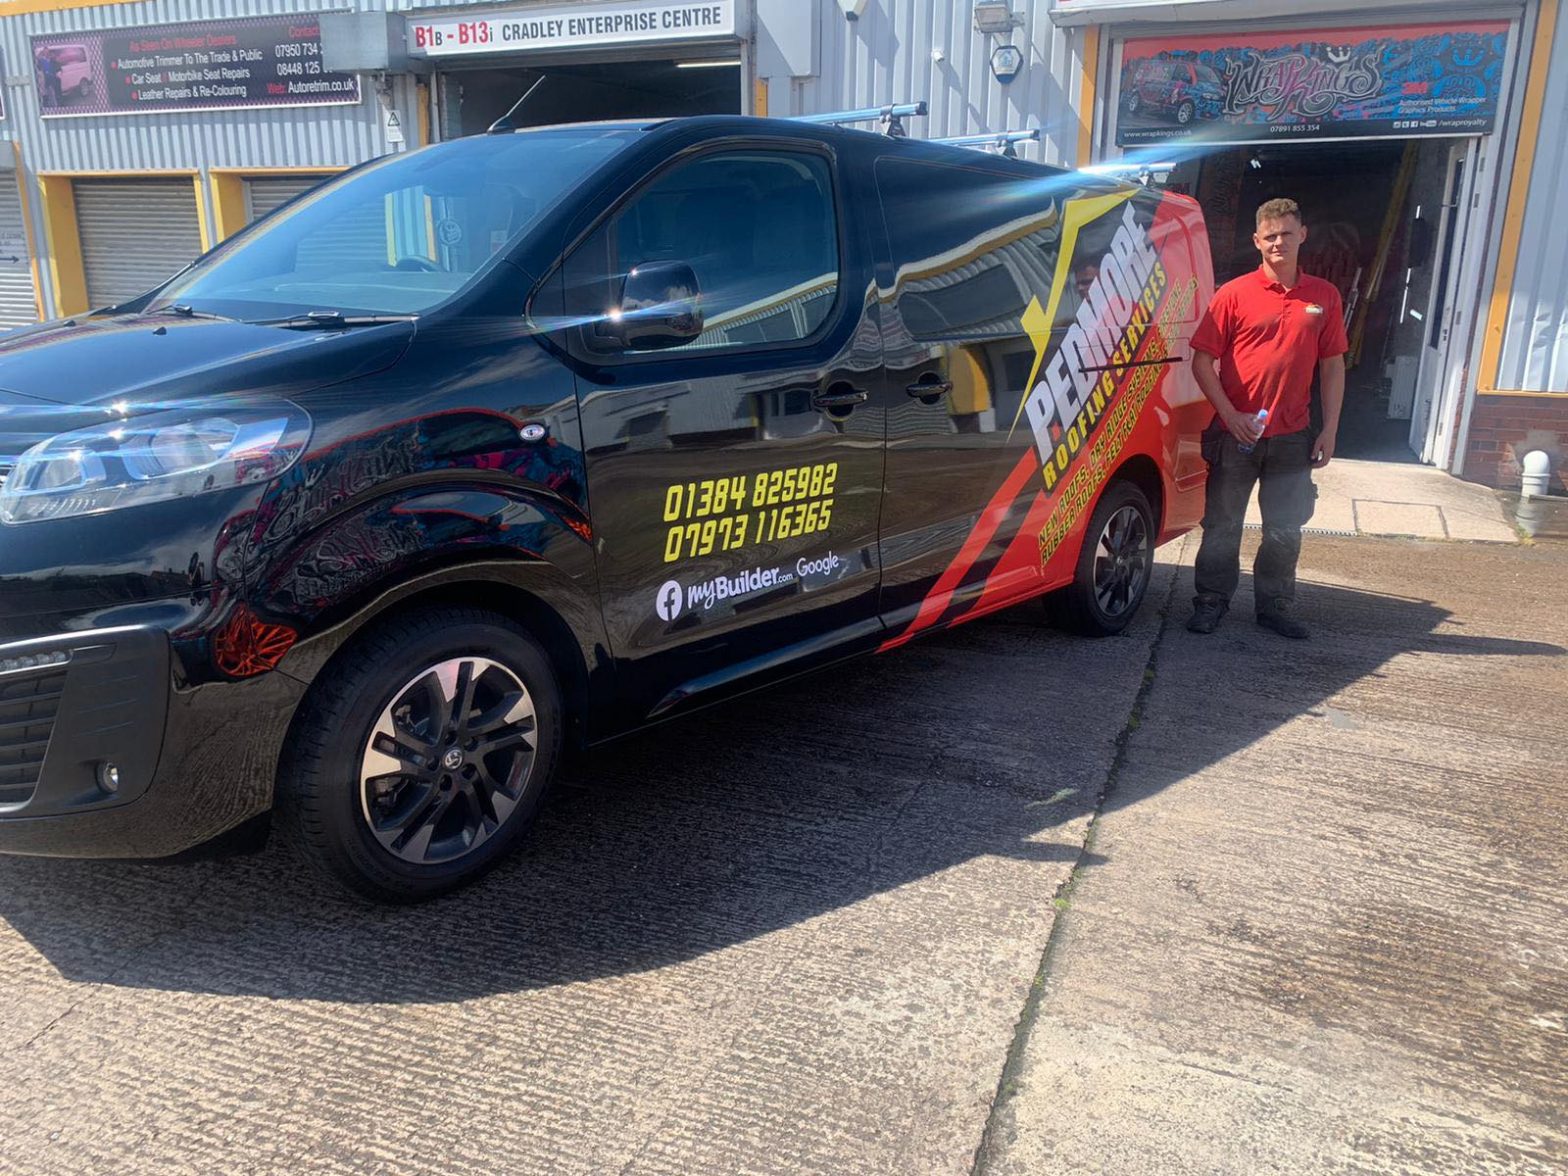 The owner of Pedmore Roofing Services standing next to a freshly wrapped company van